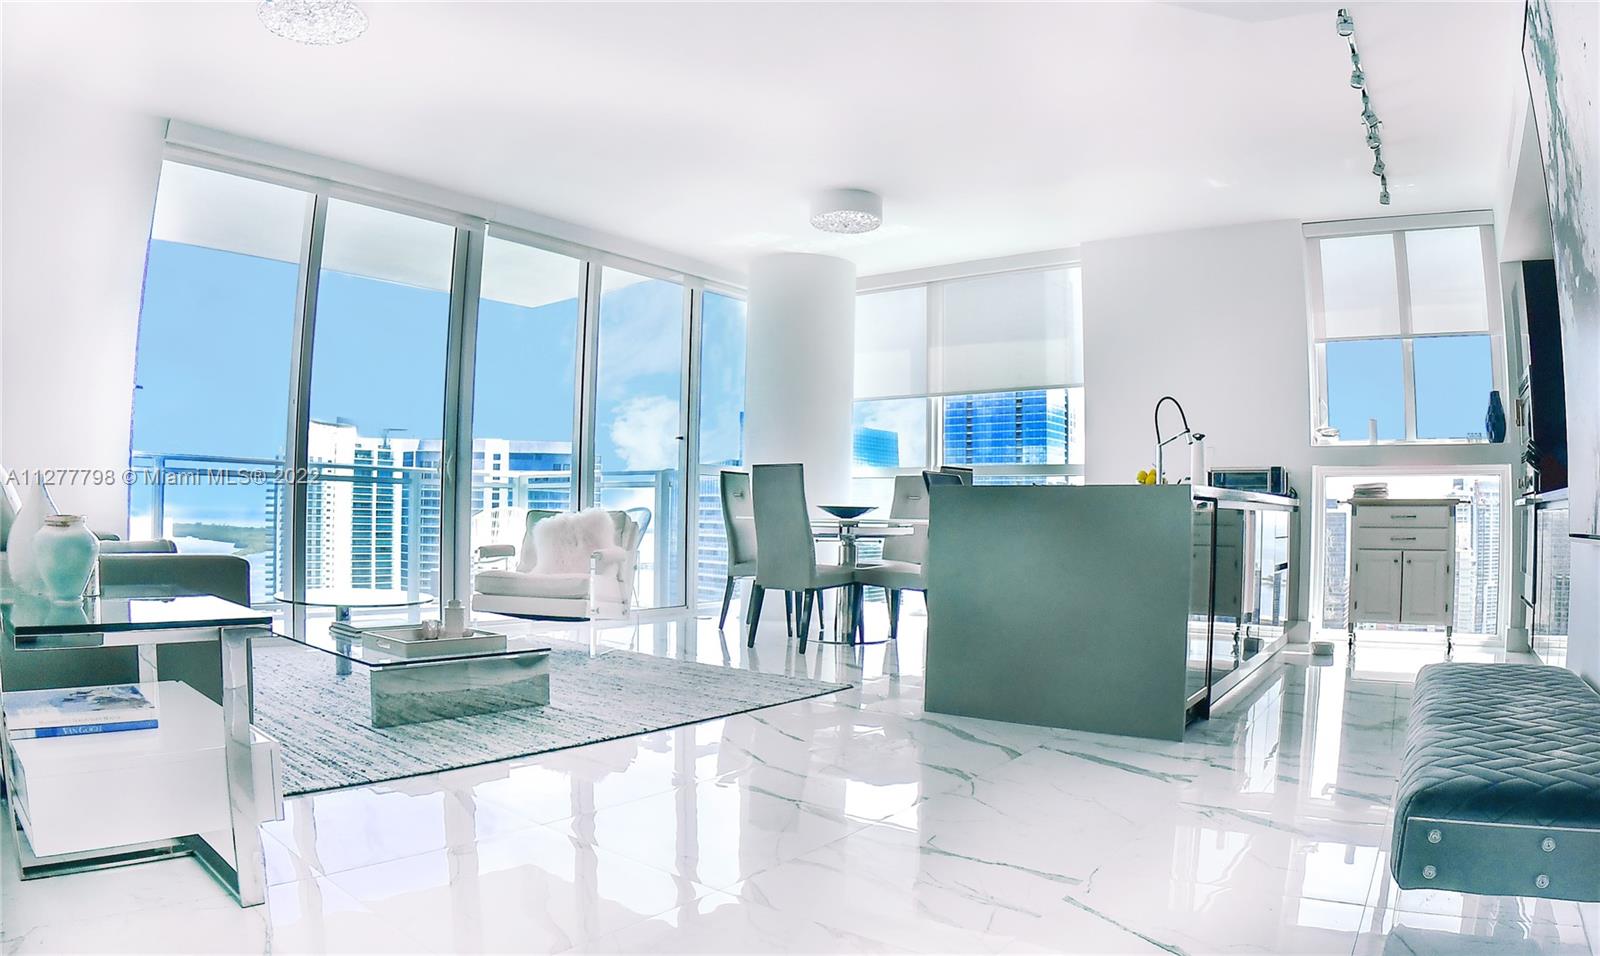 JUST REDUCED FOR A QUICK SALE!! Spectacular condo, corner unit and the best line at The BOND 3 beds/3 Baths with Breathtaking views to the ocean and city from the 40th floor. Developer floor plans shows 1710 Sq. Ft living area,  This modern 3 beds 3 baths luxury unit features kitchen with top of the line appliances and porcelanosa throughout the entire unit including the huge balcony.  THE BOND is located in the heart of the Miami financial district, walking distance to Brickell city center, restaurants and more. The Bond was inspired by classic British elegance, while having luxury amenities. This exclusive development has 5,000 square feet of retail space and also have 595 parking spaces. ATTENTION INVESTORS!! UNIT CAN BE RENTED 12 TIMES A YEAR (30 days Minimum)